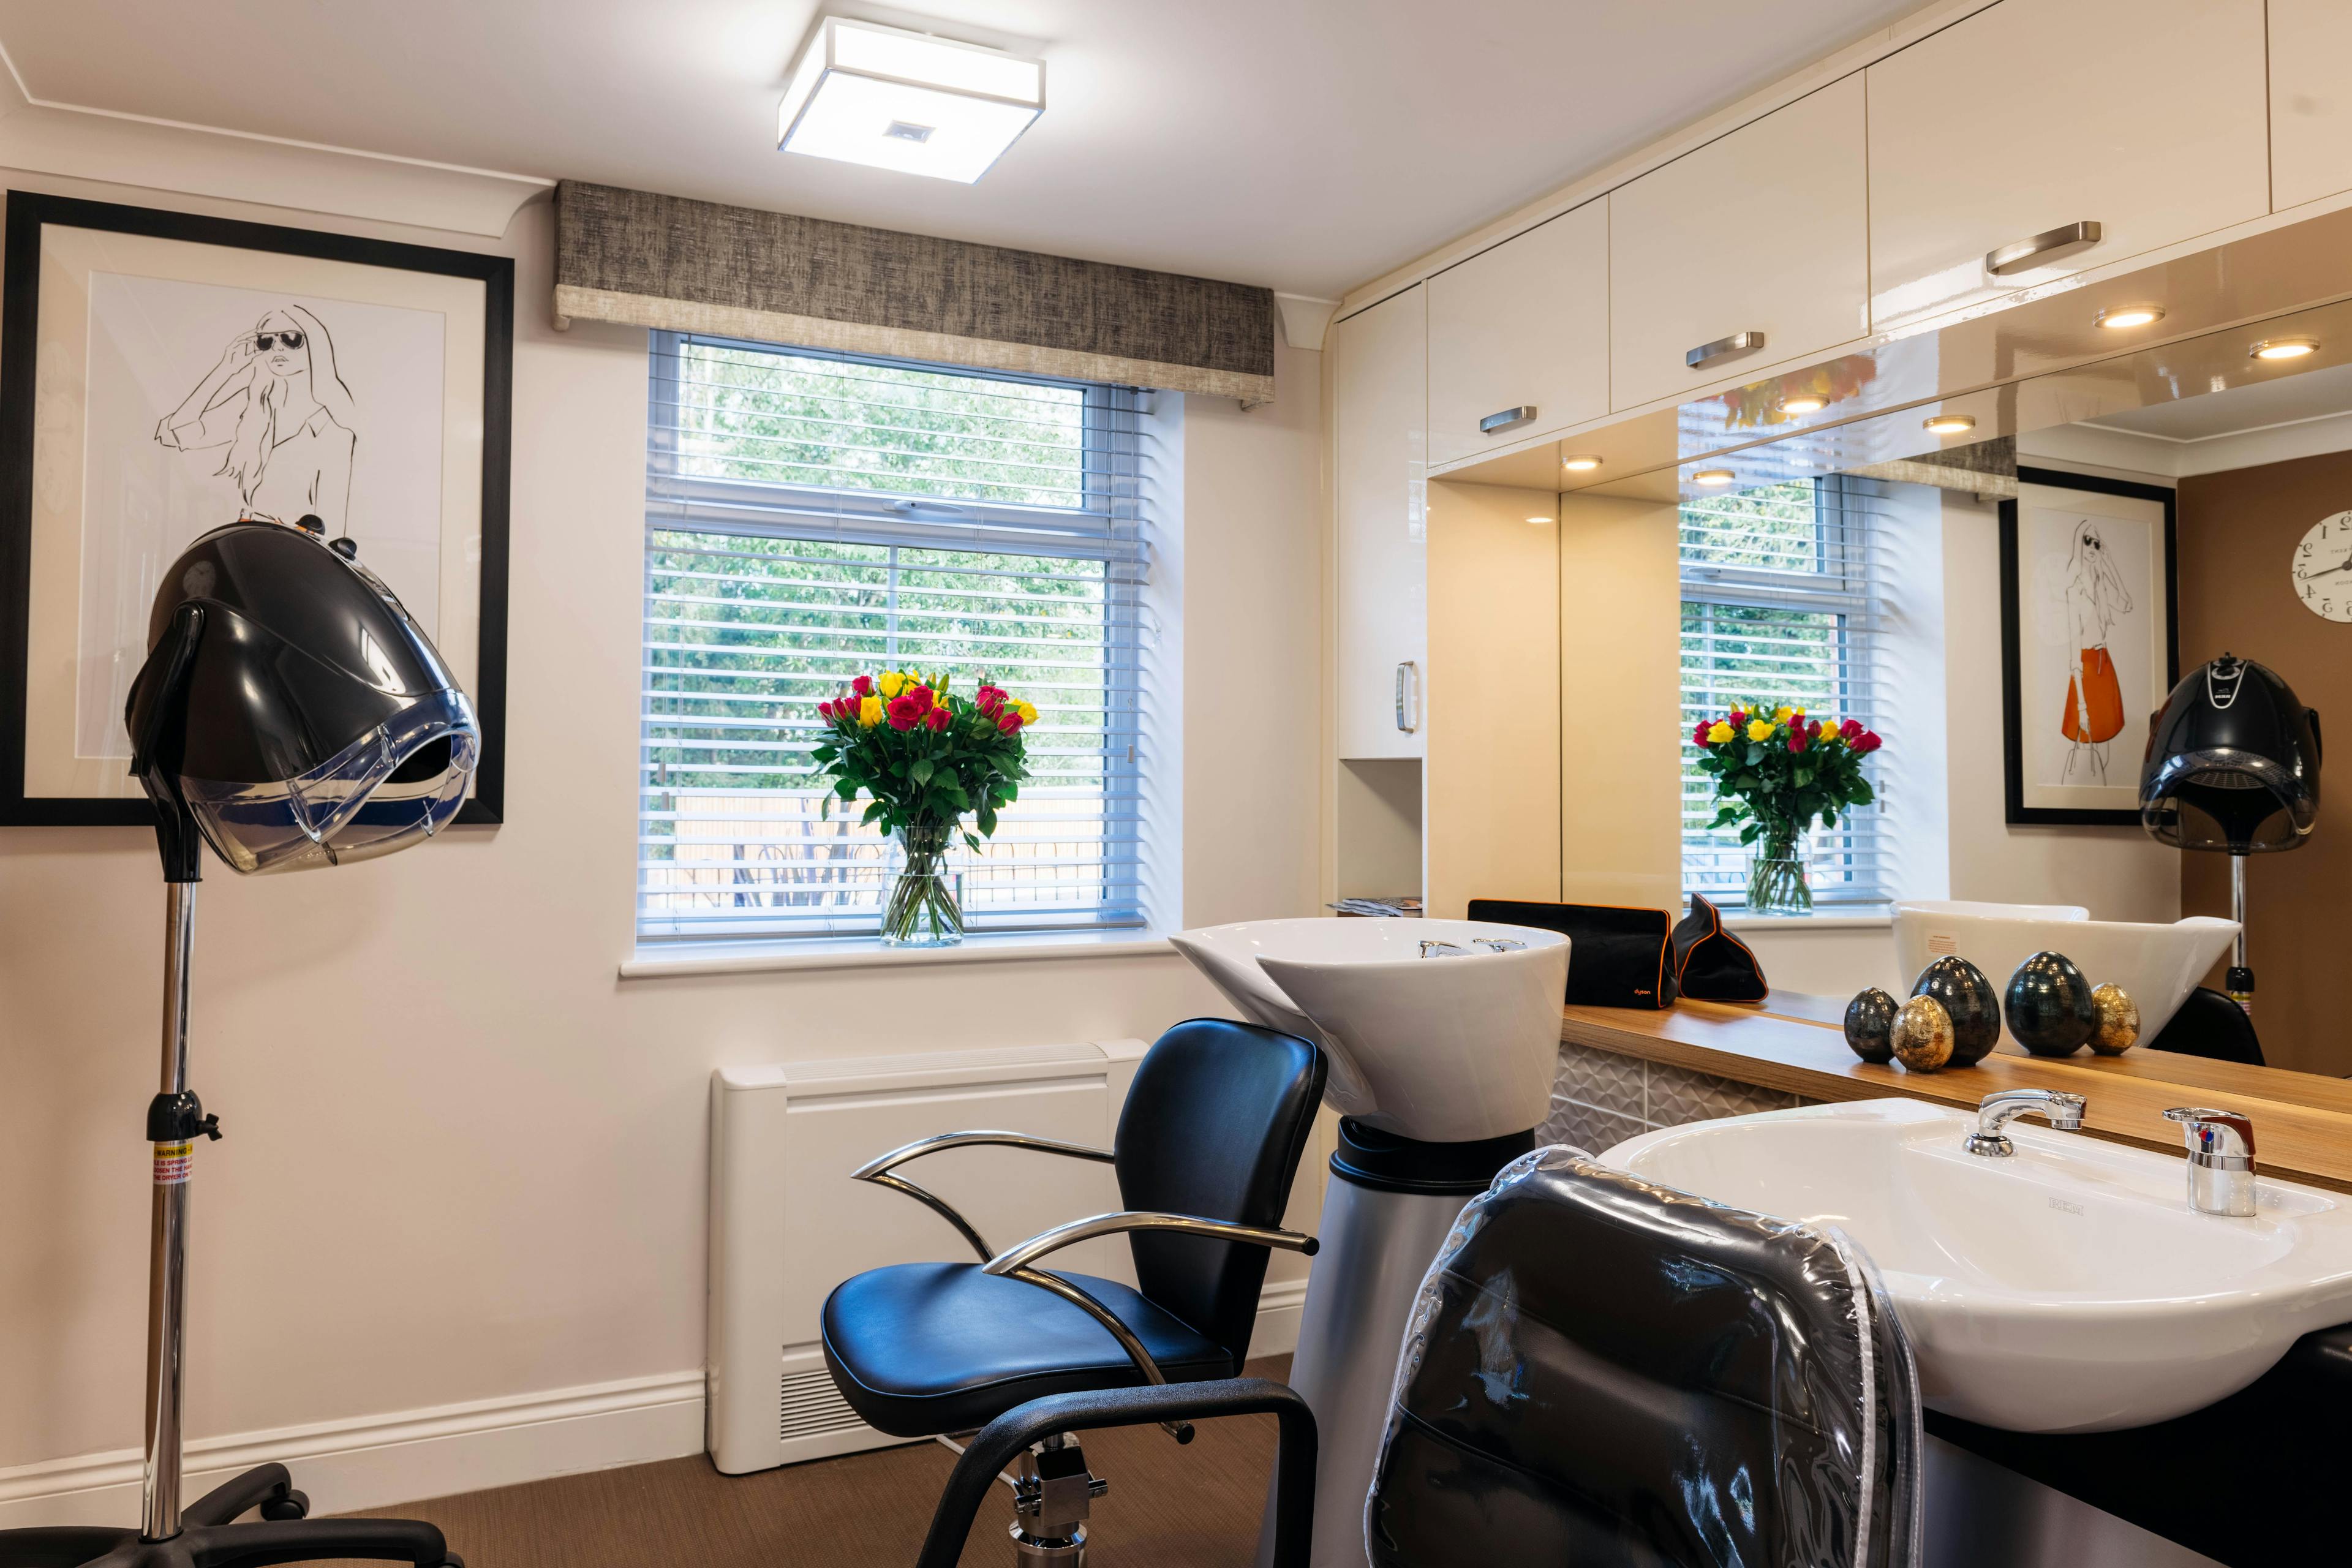 Salon at Lydfords Care Home in Lewes, East Sussex